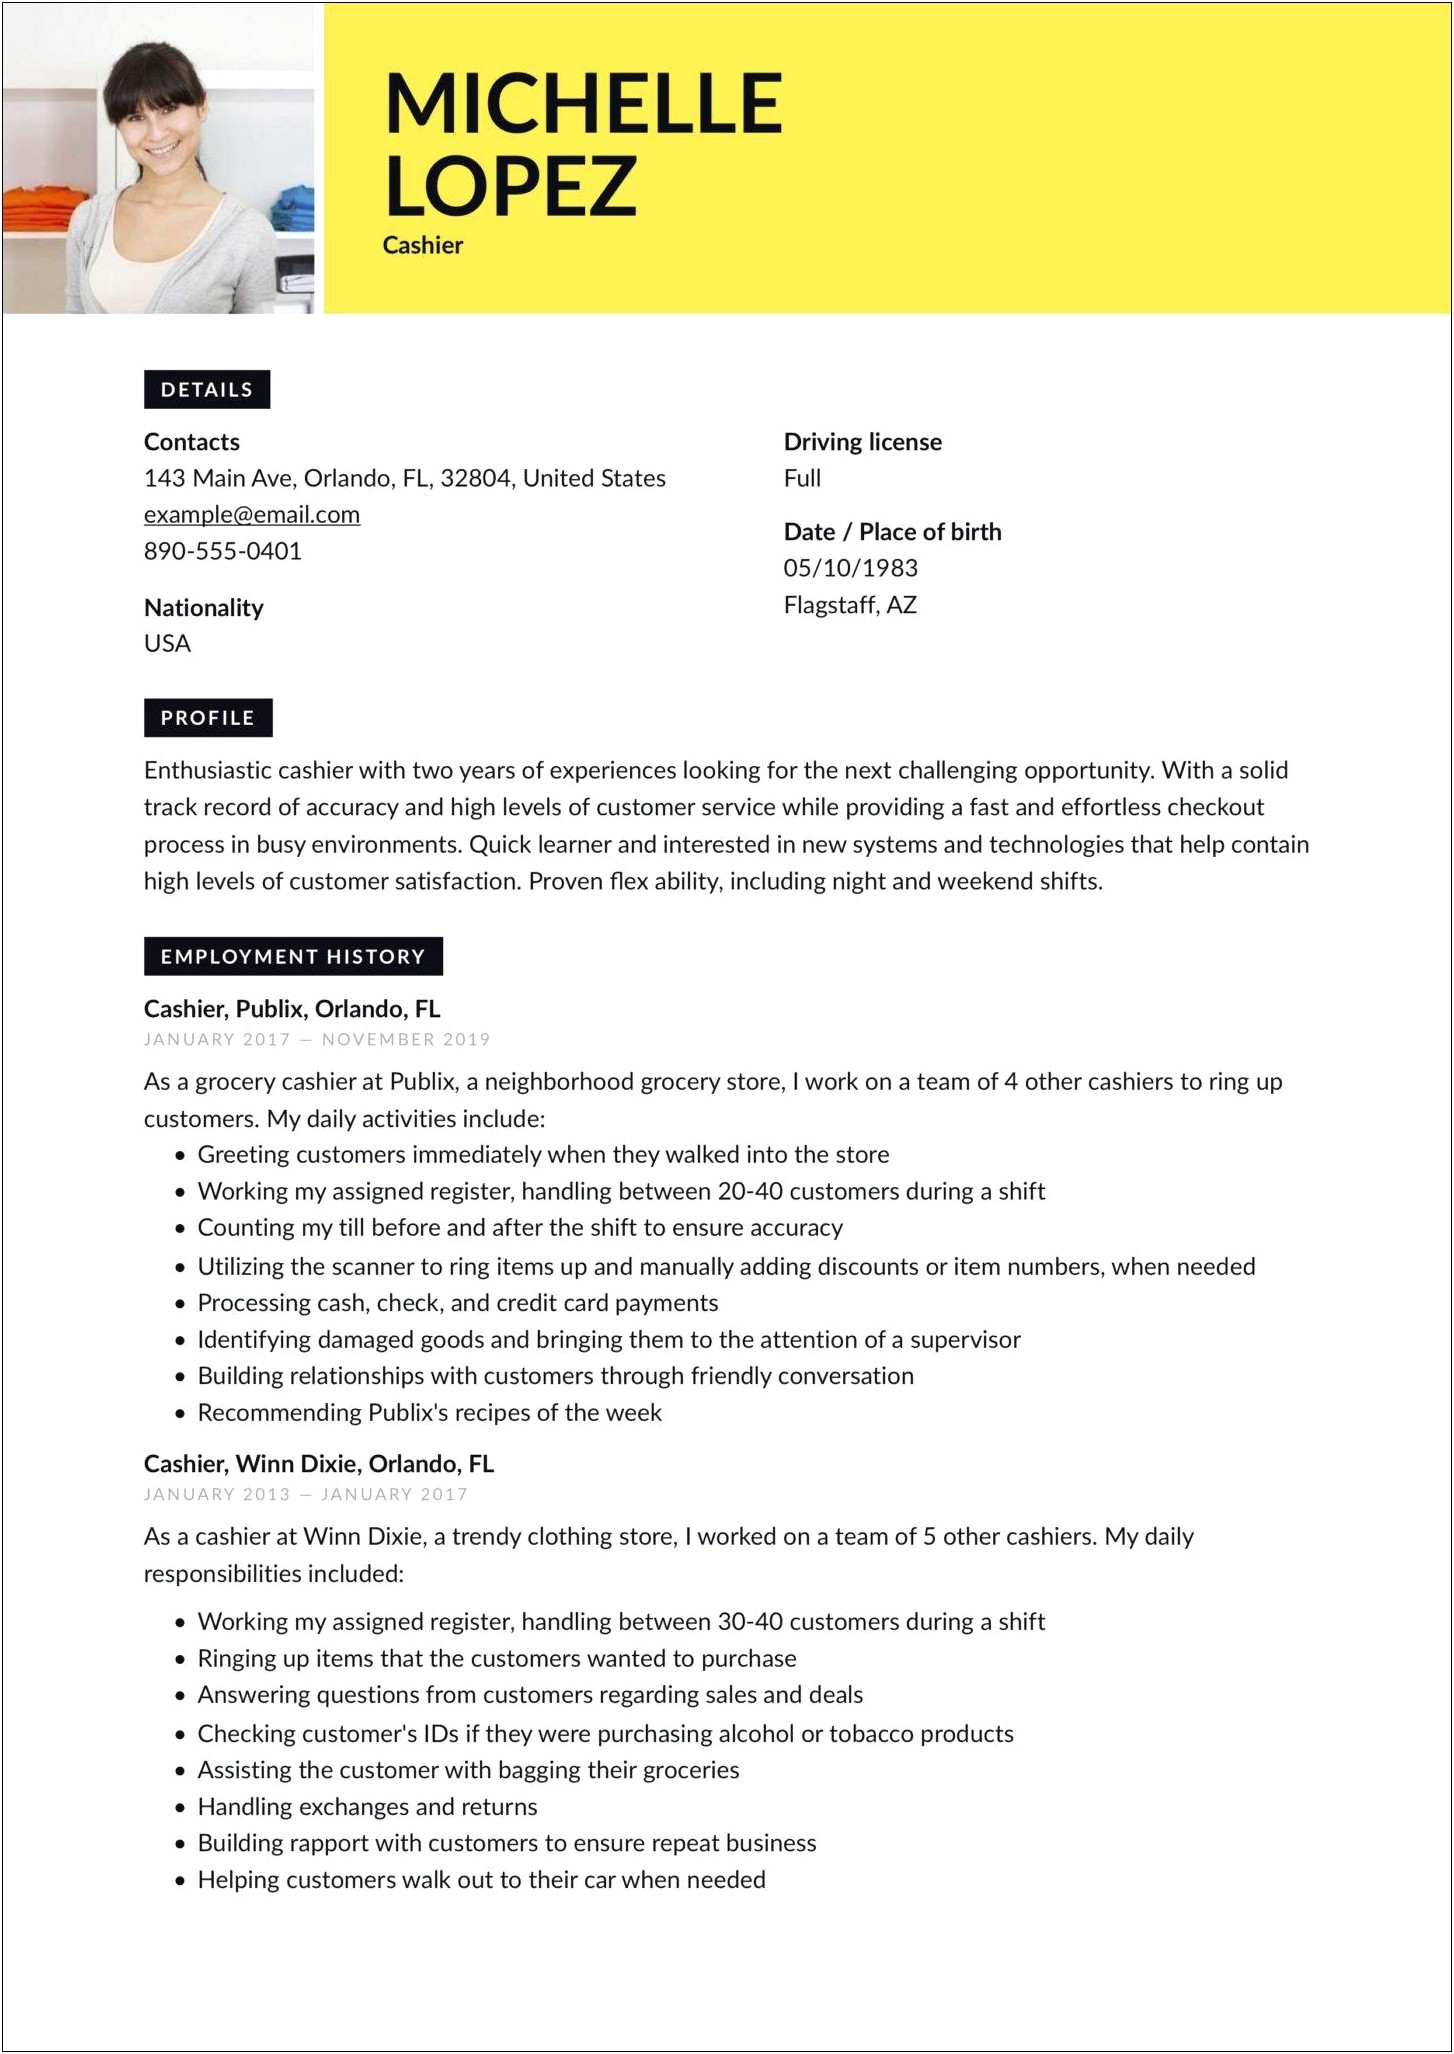 Words For Quick Learner For Resume